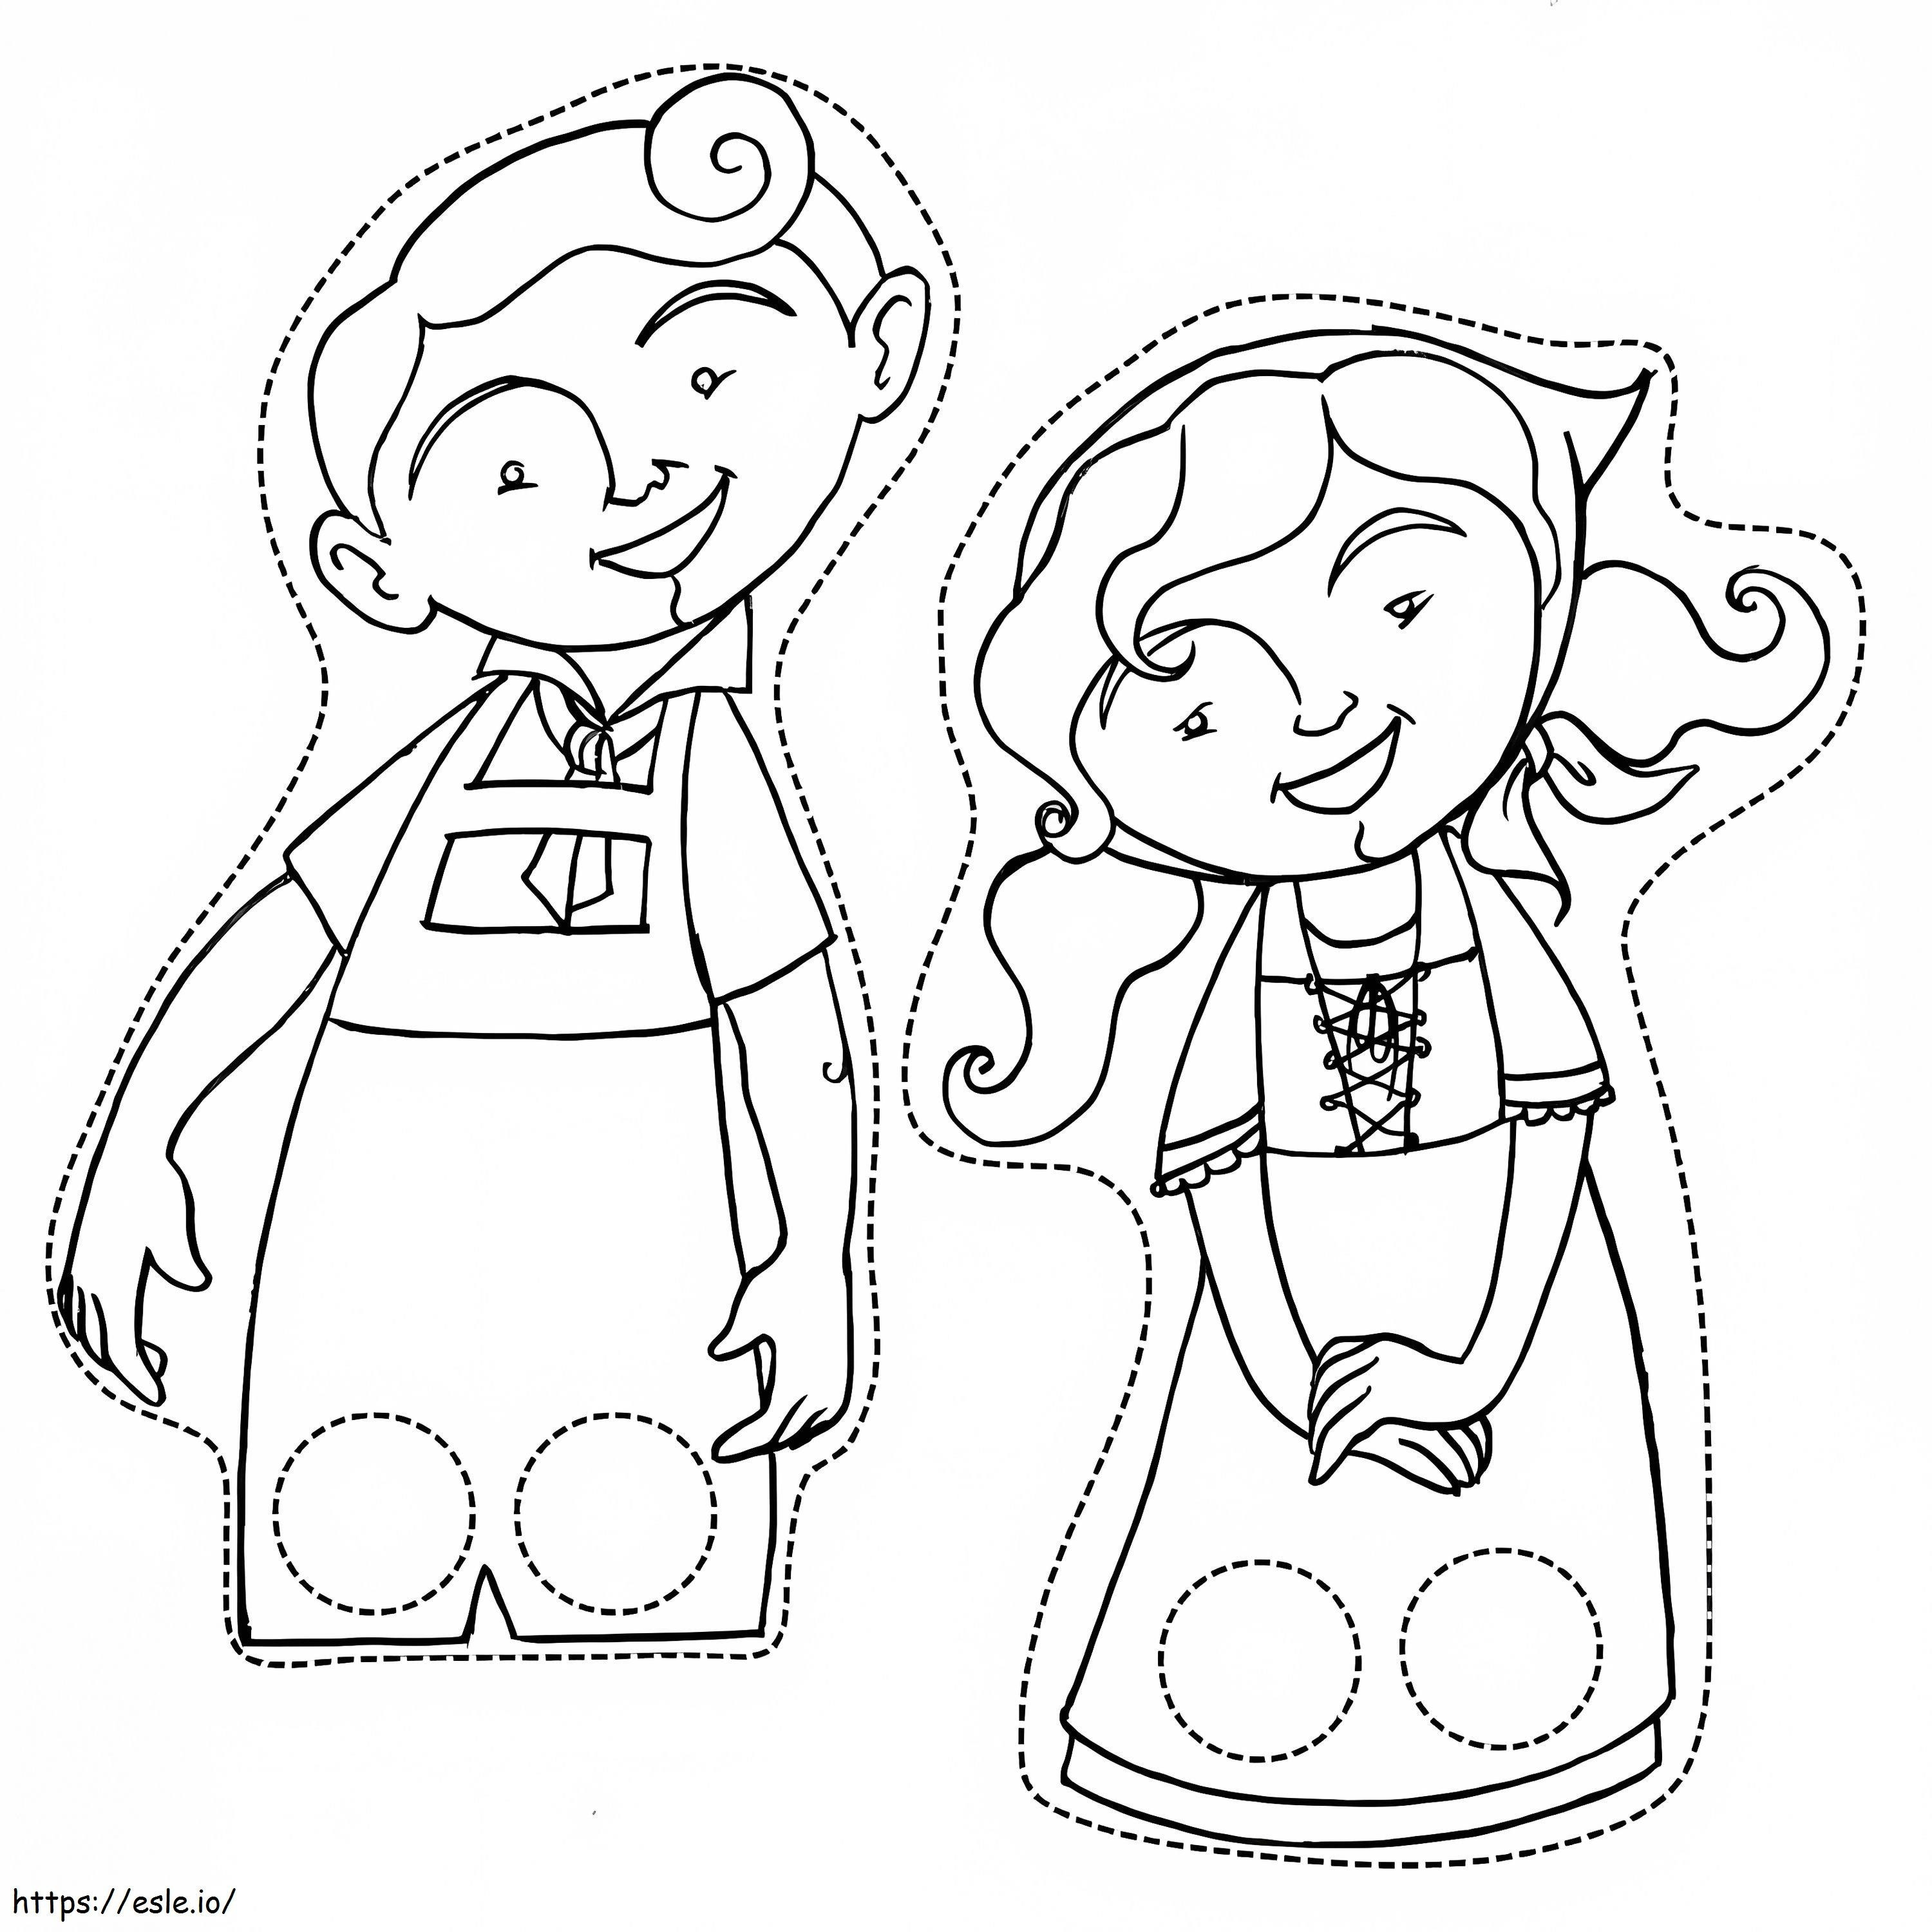 Finger Puppets coloring page